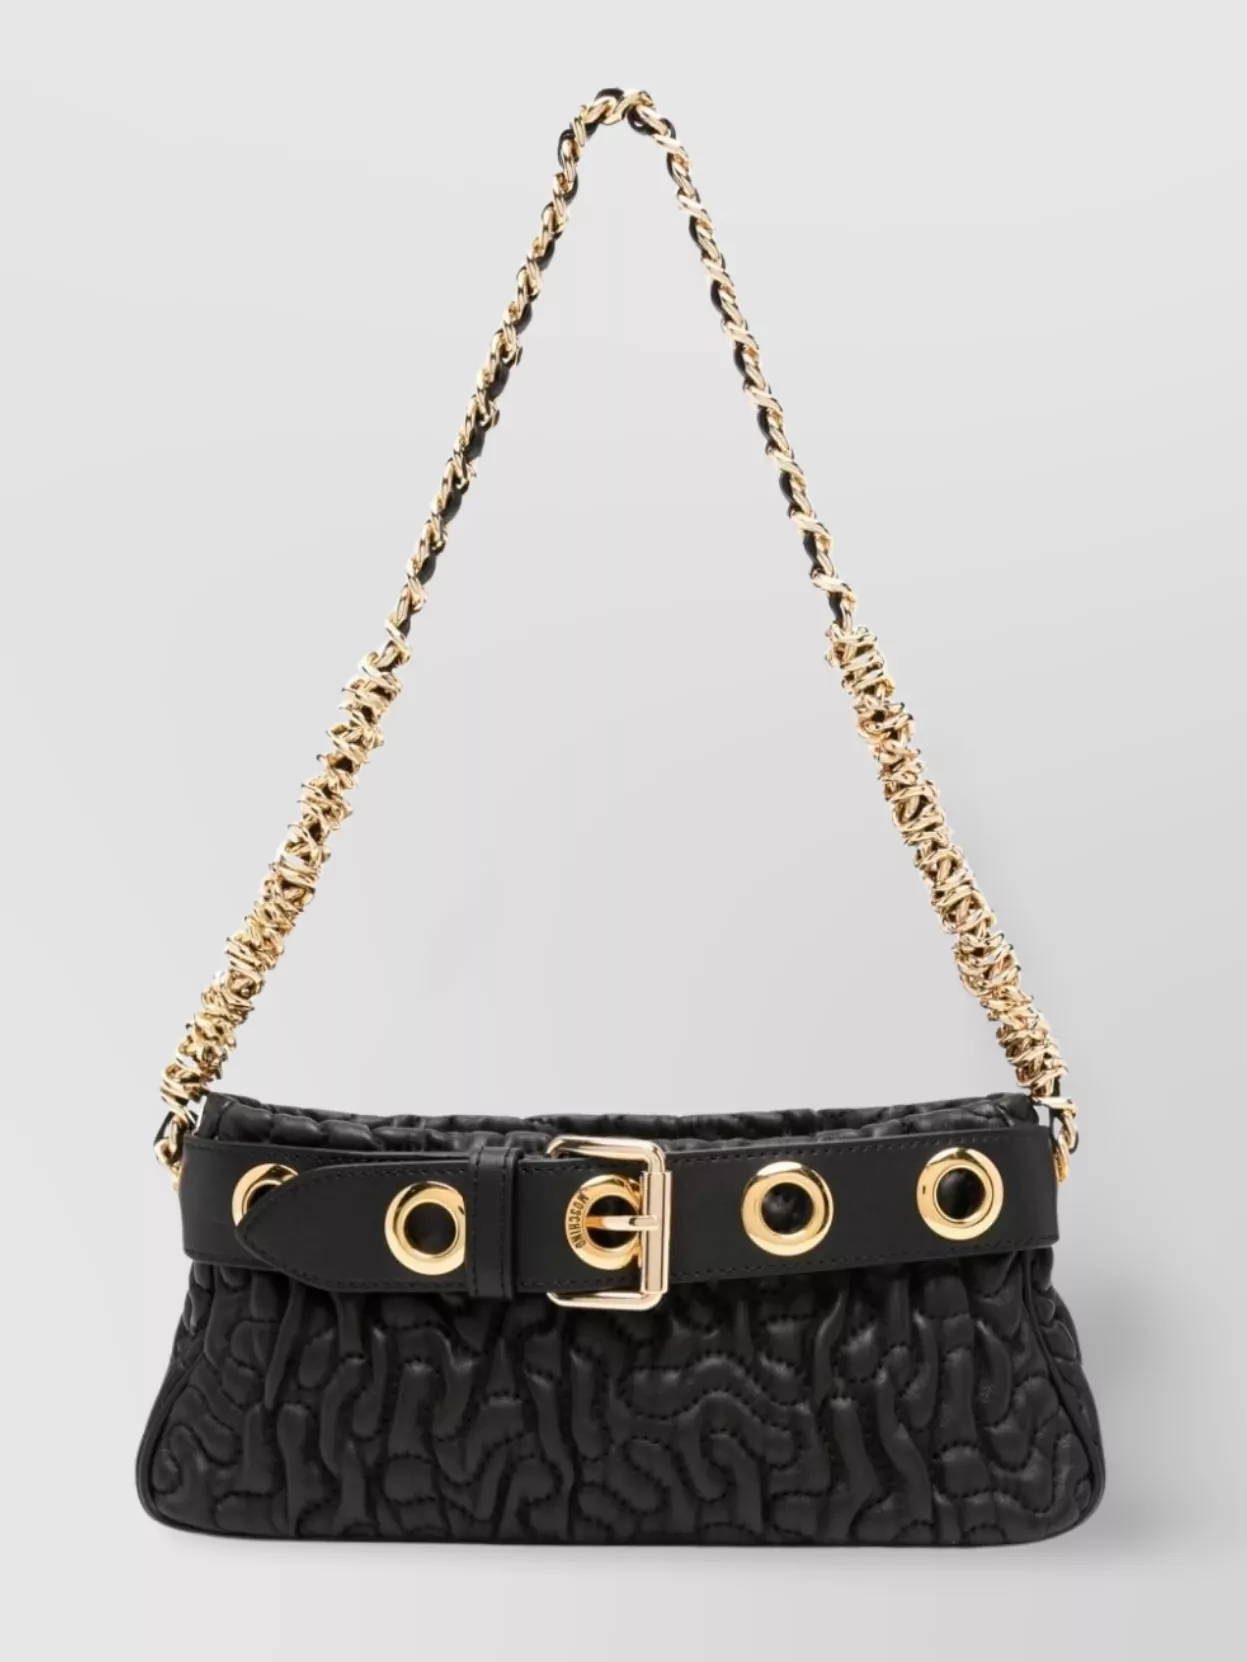 MOSCHINO DISTRESSED LEATHER SHOULDER BAG WITH CHAIN-LINK STRAP